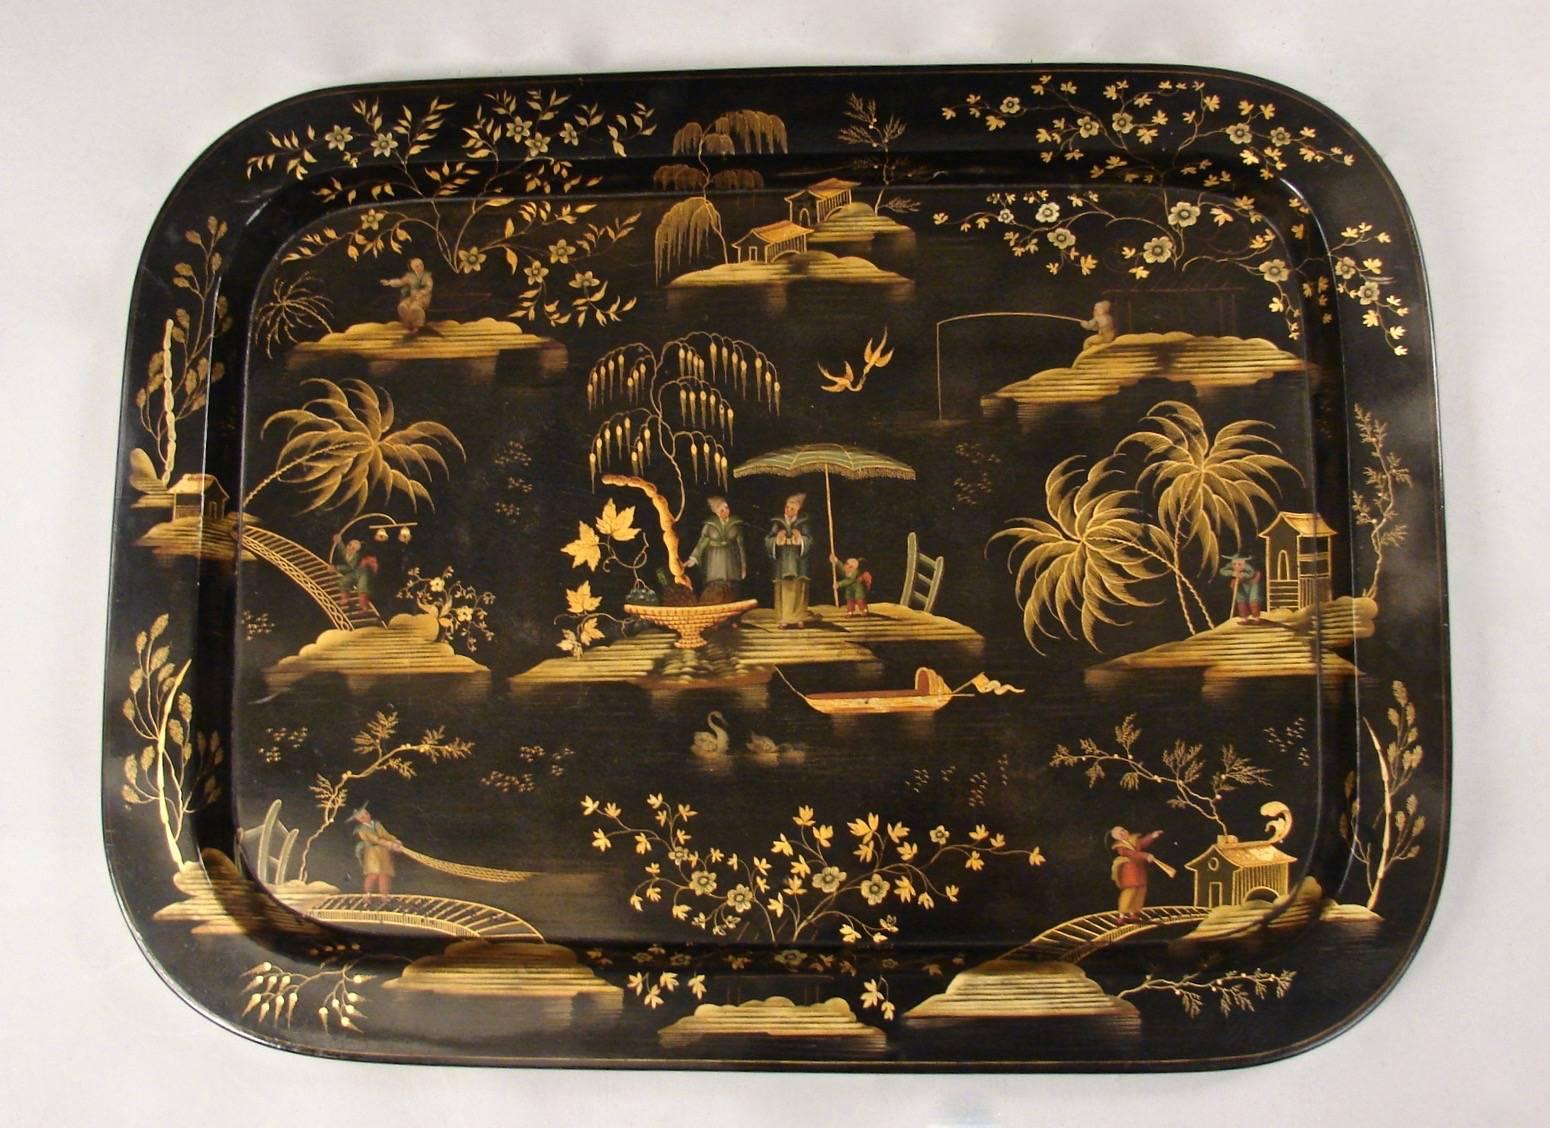 A fine quality Regency papier mache tray in excellent overall condition, the beautifully executed tray depicting a mythological Chinese river scene with fisherman, swans and trees, circa 1825.